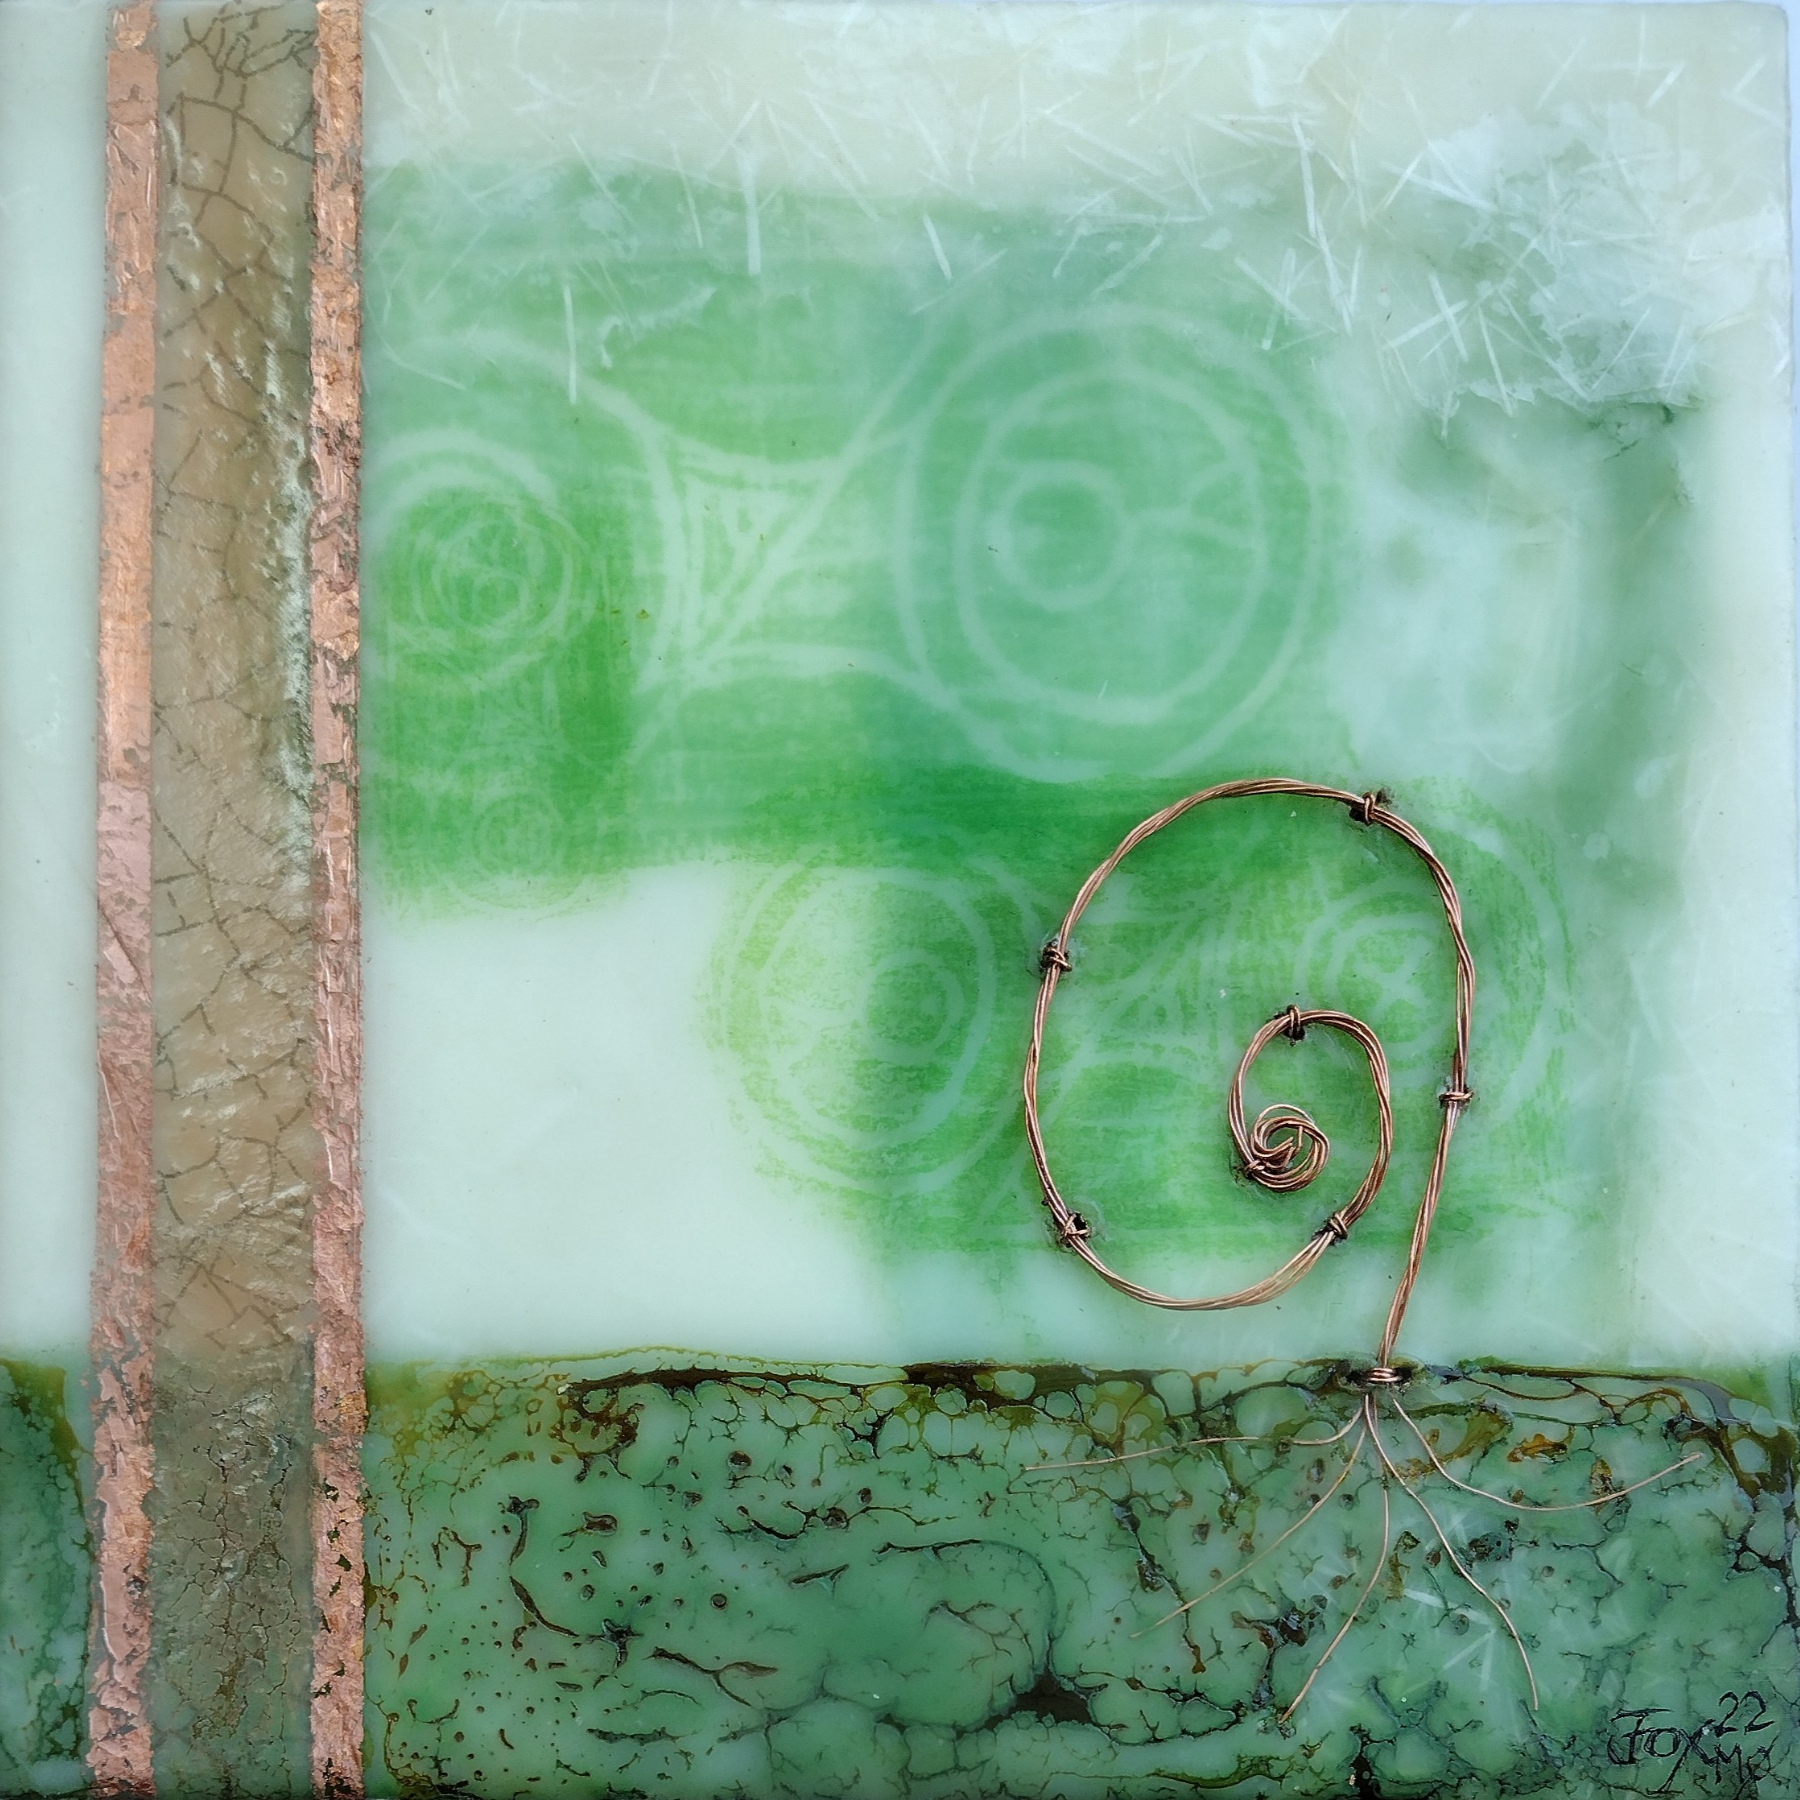 encaustic mixed media painting with green copper uncoiling by Janet Fox